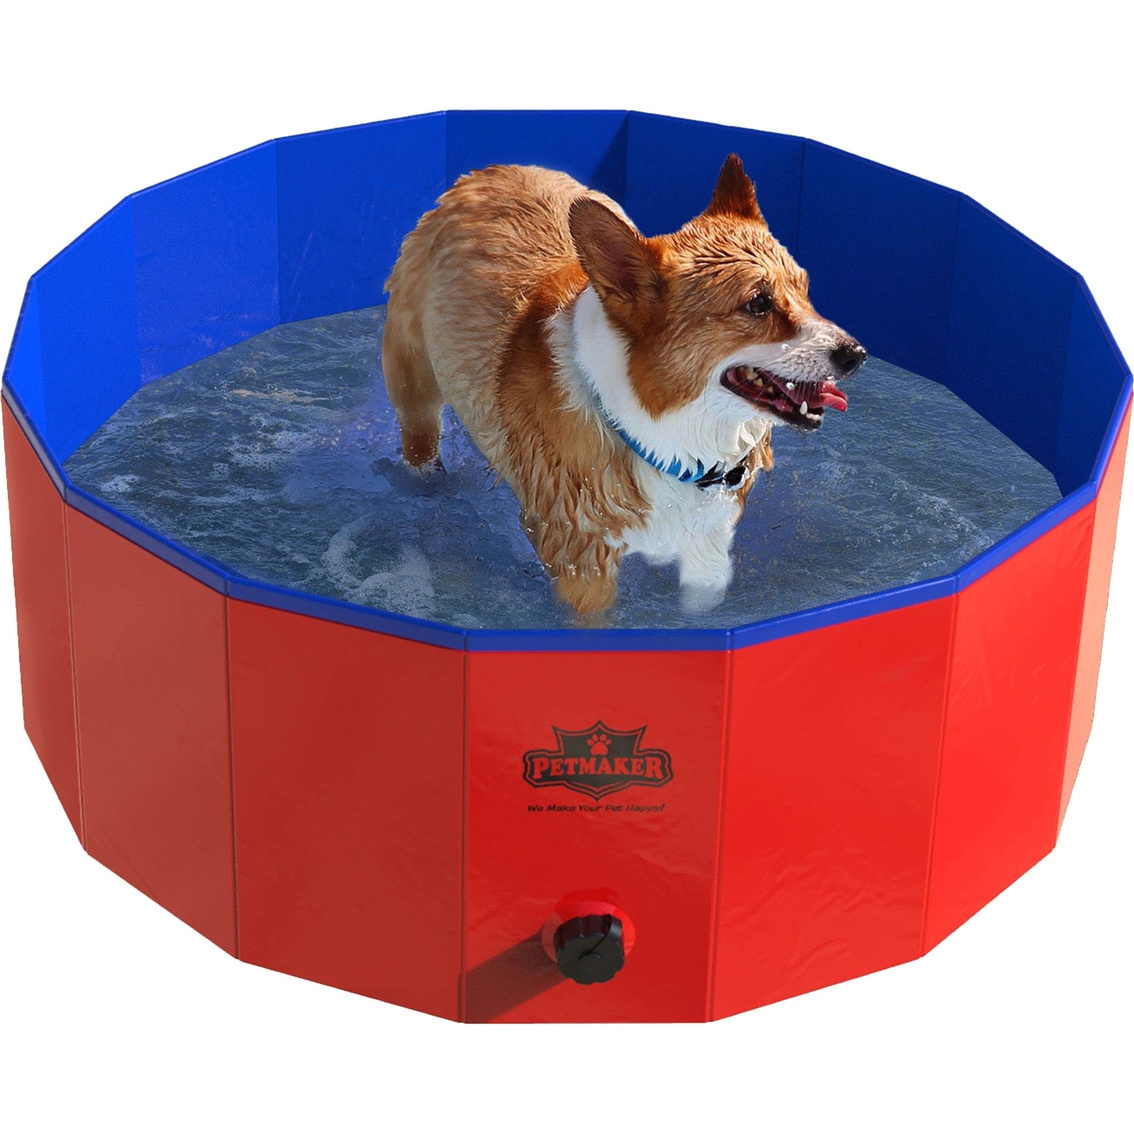 Petmaker Collapsible Pet Dog Pool and Bathing Tub - Image 5 of 8